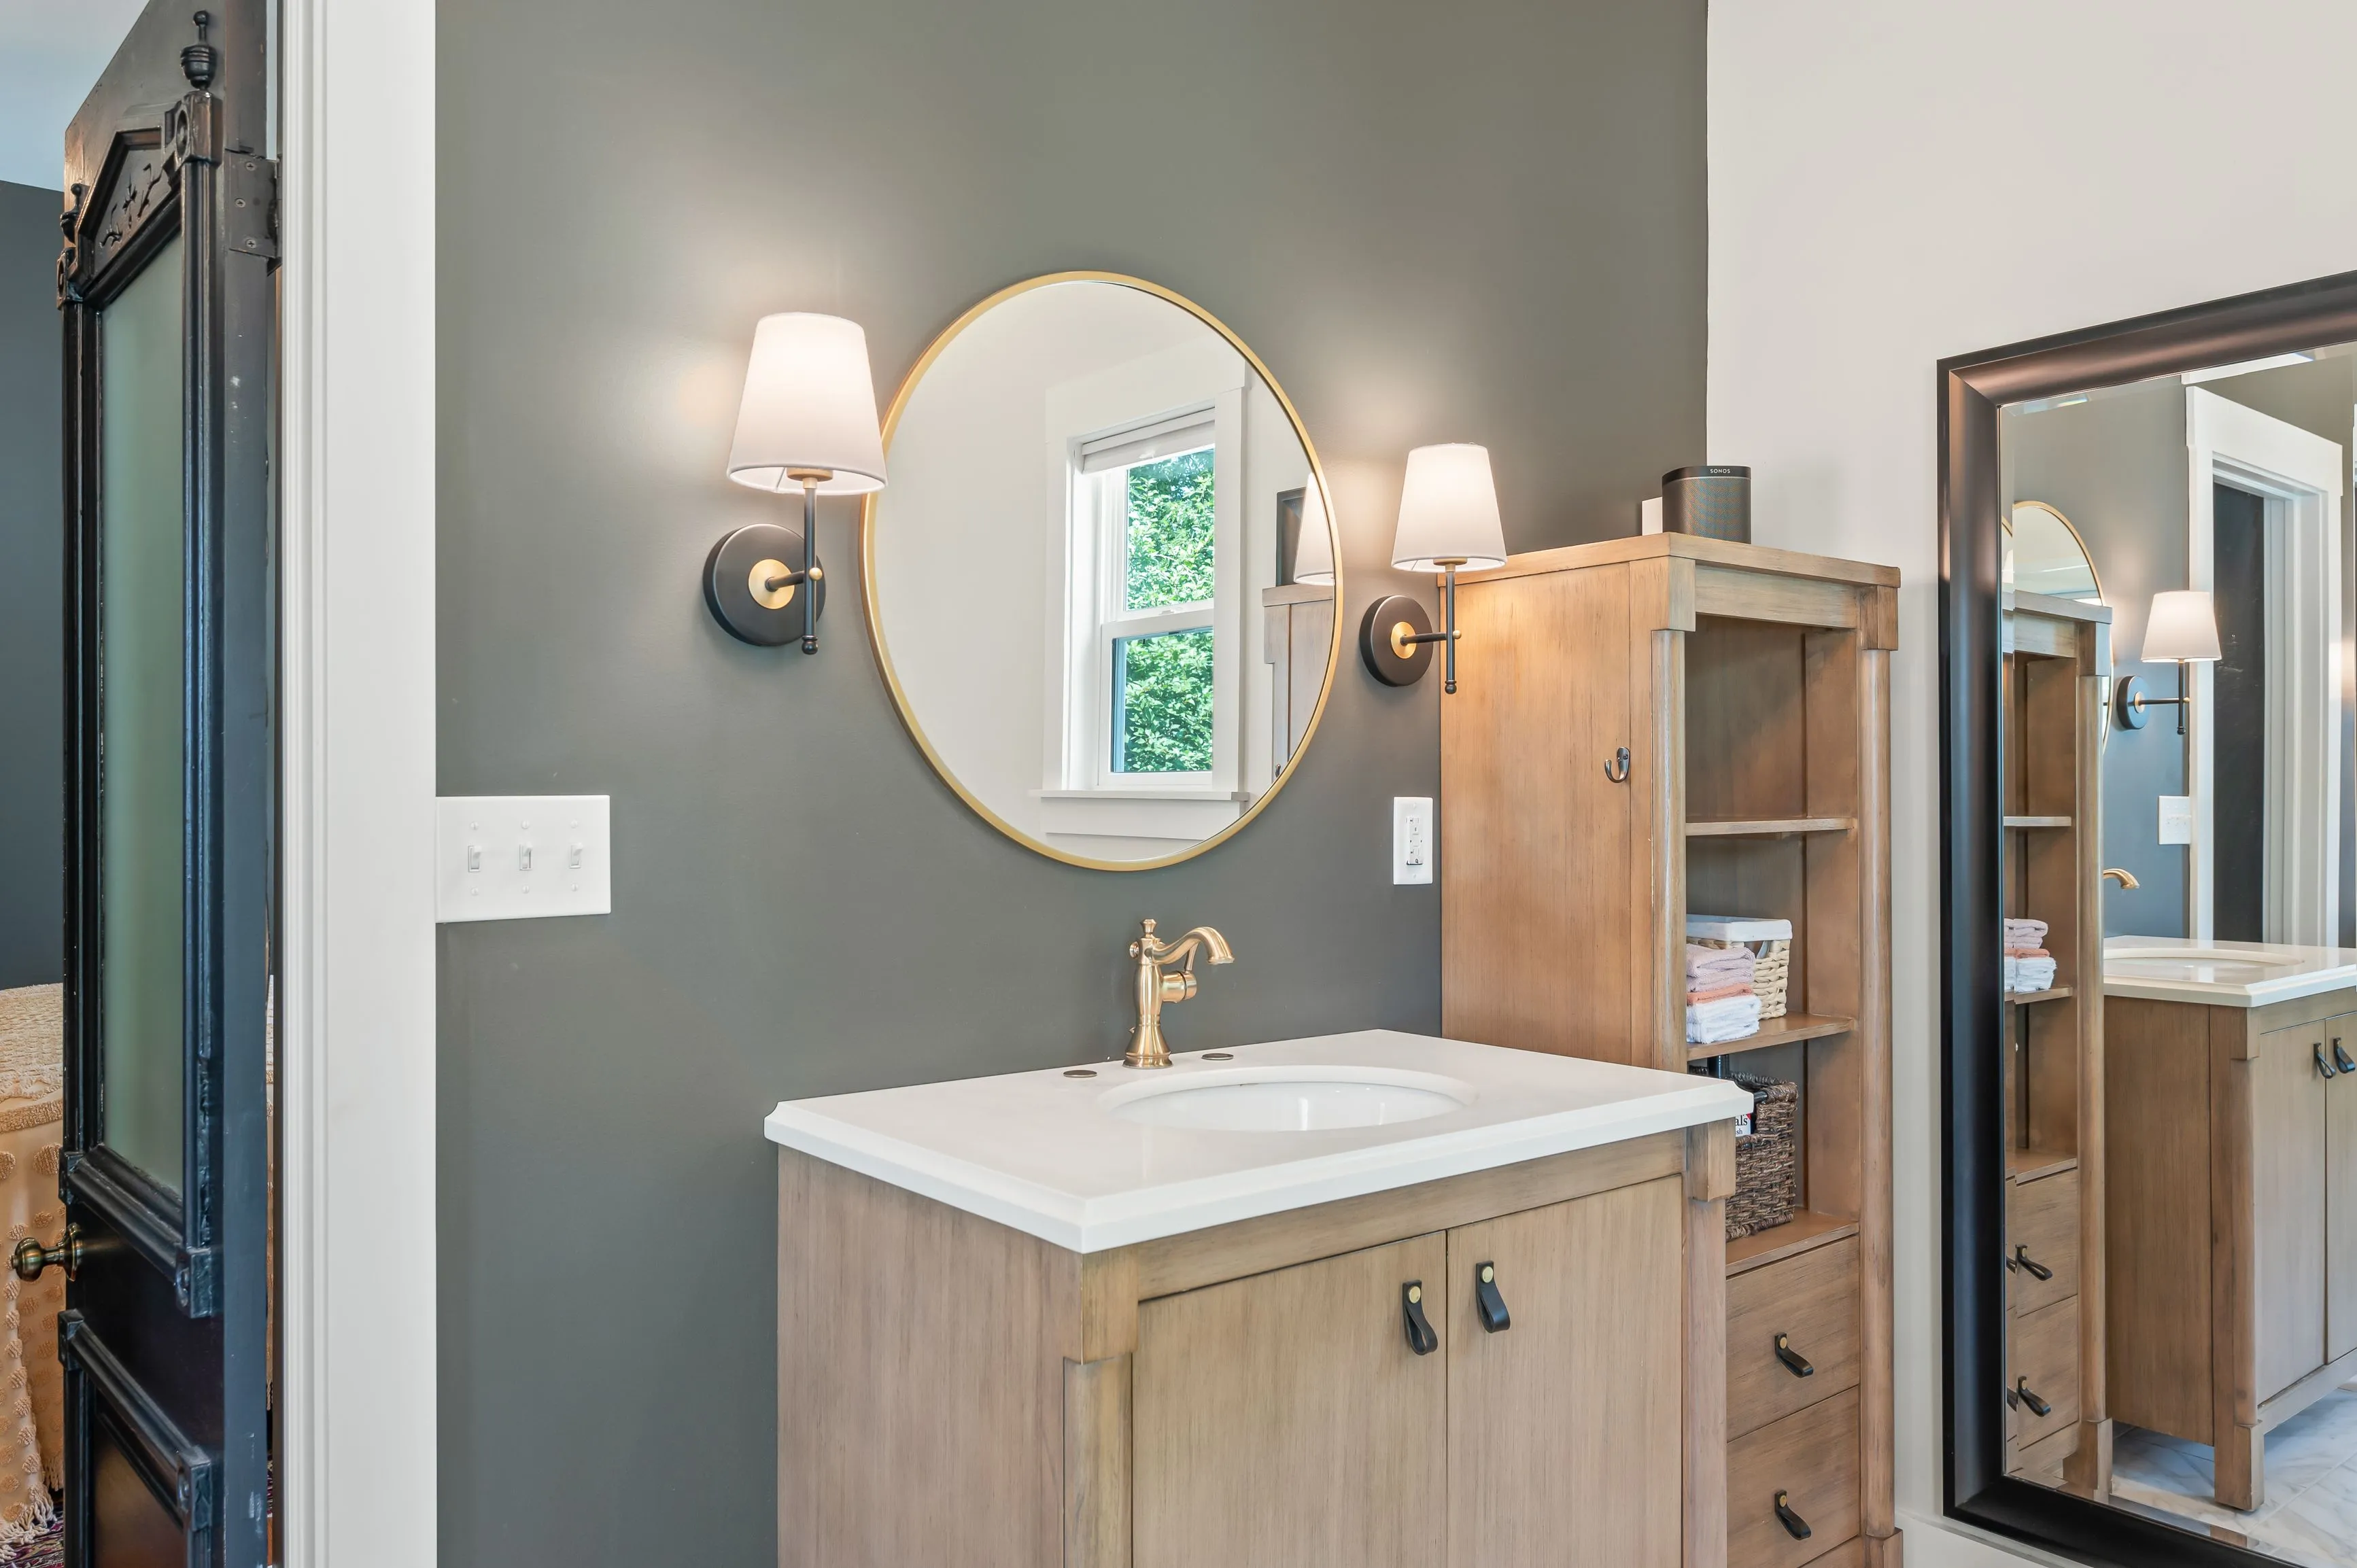 Modern bathroom with a gray wall, wooden vanity with a white sink, round mirror, and sconce lighting fixtures.